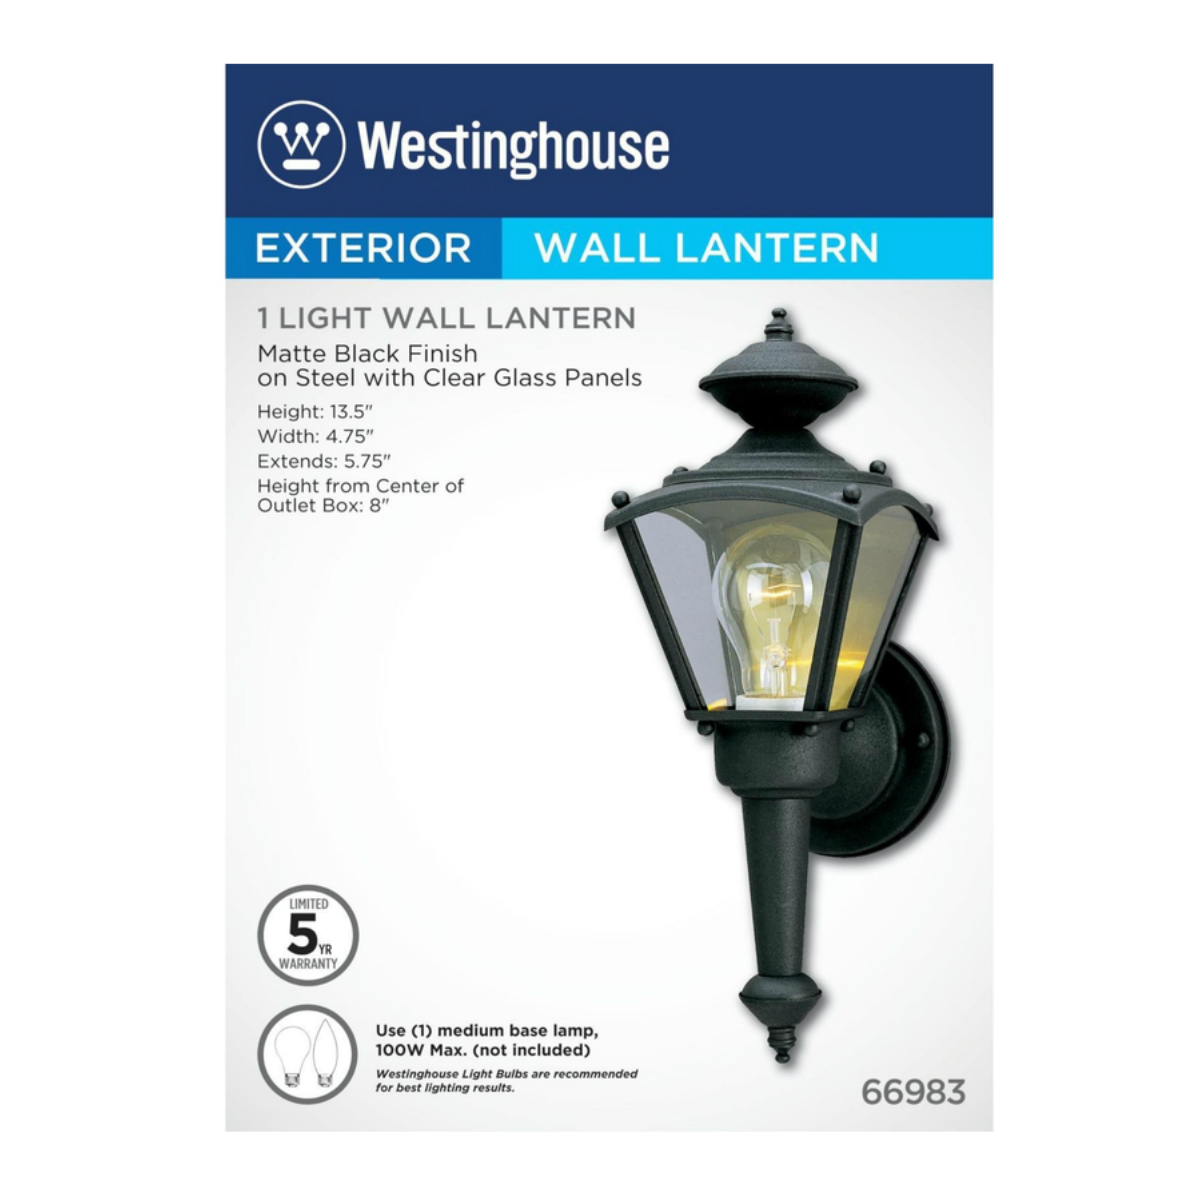 Westinghouse 66983 Outdoor Wall Lantern Fixture, 13" x 5.25" x 4.75"